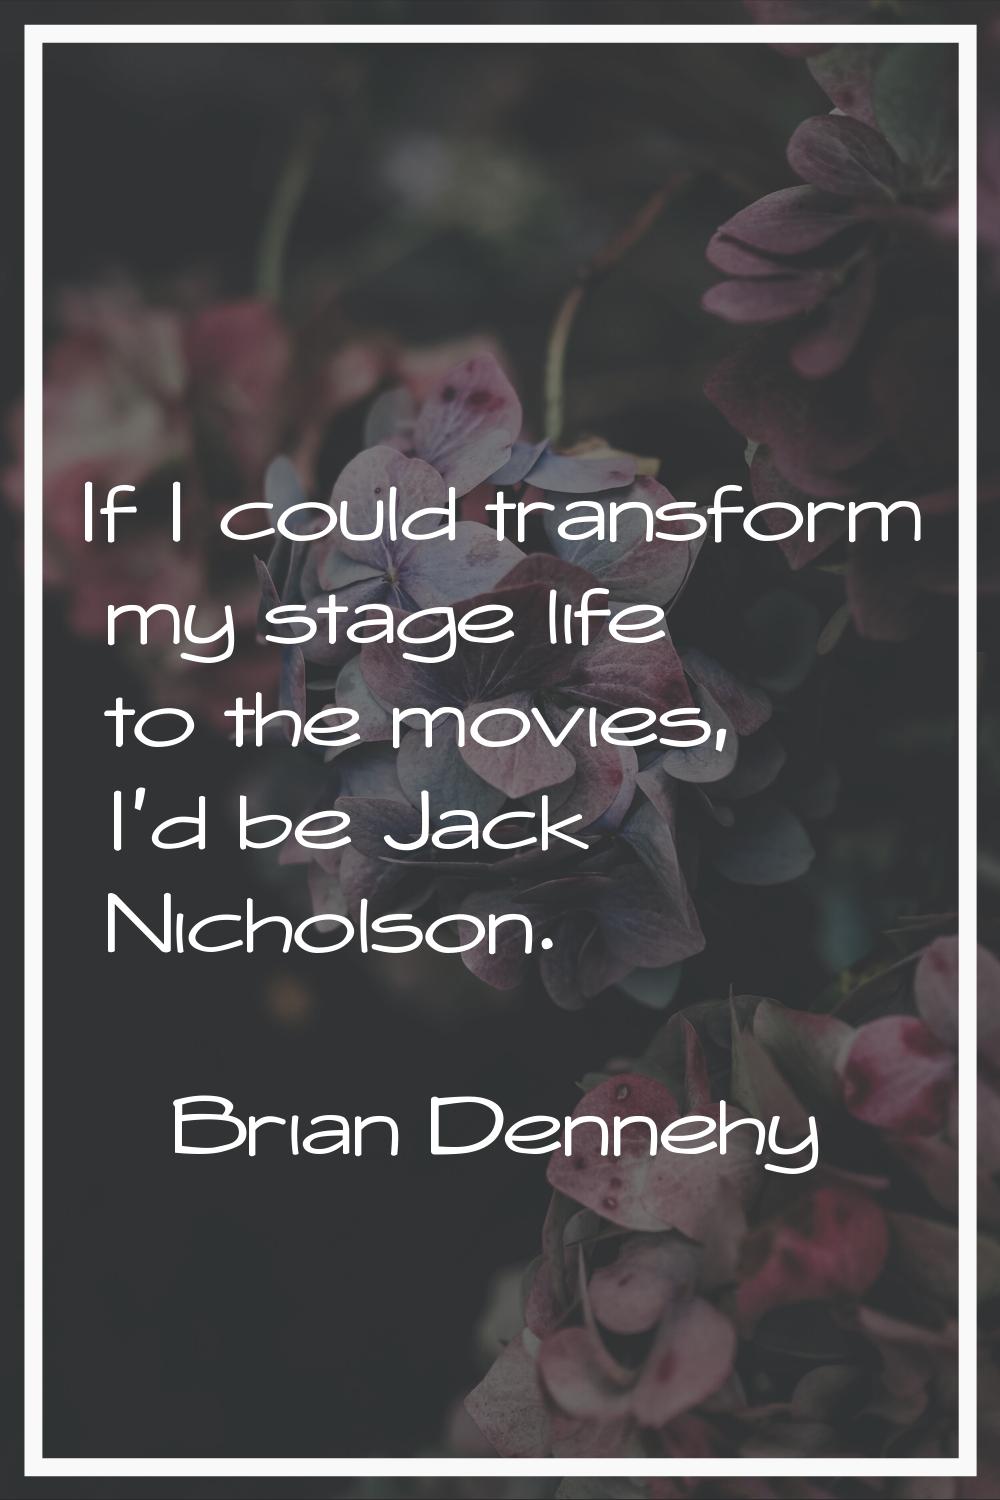 If I could transform my stage life to the movies, I'd be Jack Nicholson.